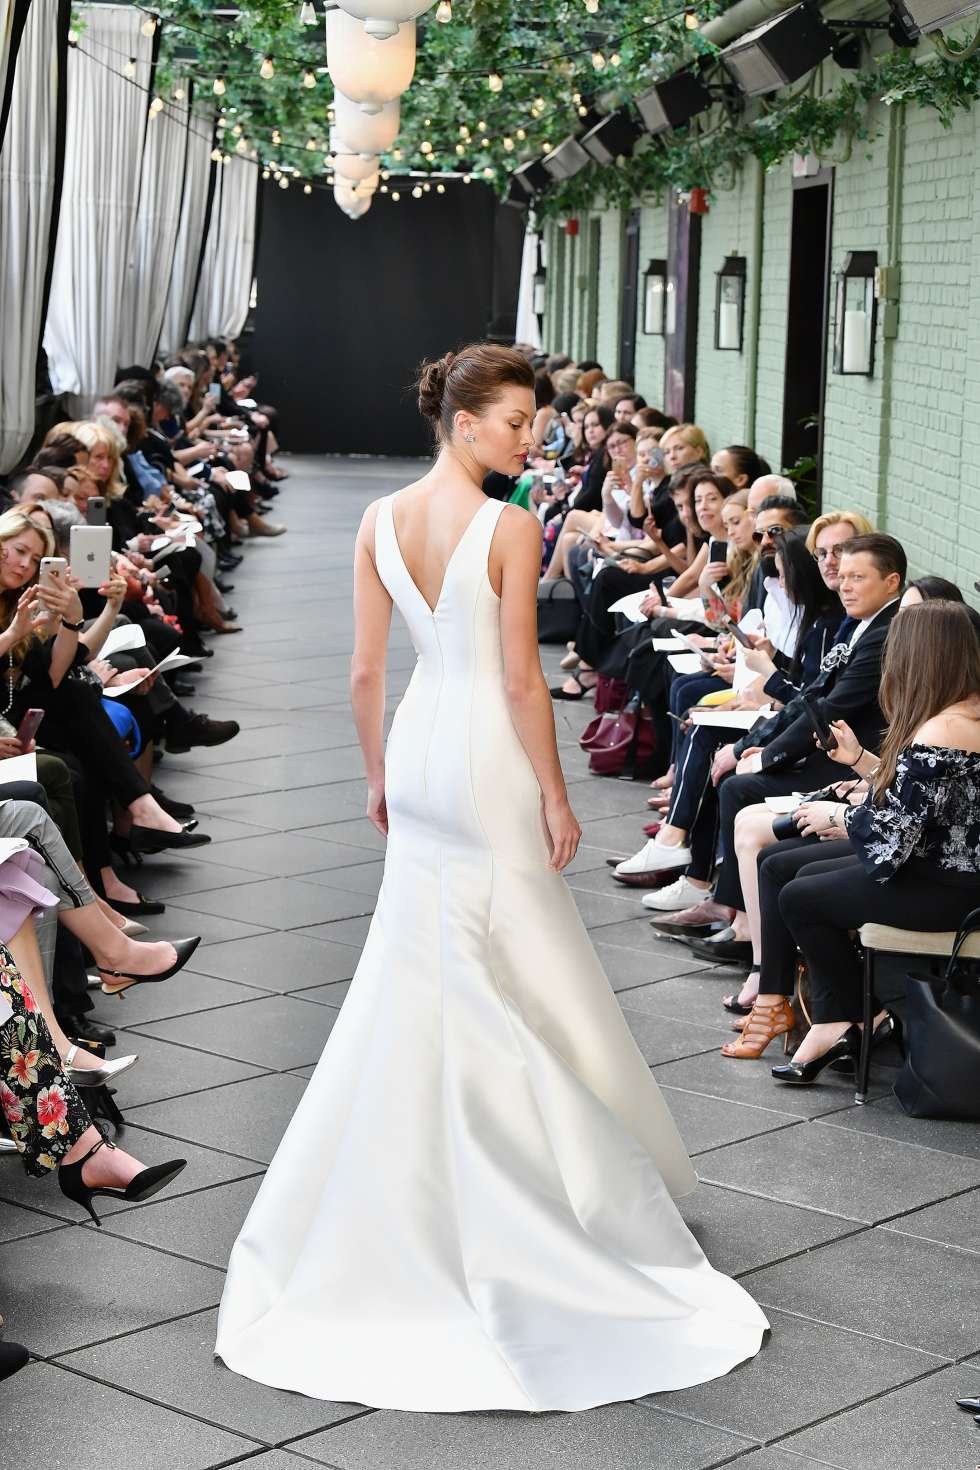 The 2019 Spring Wedding Dress Collection by Amsale